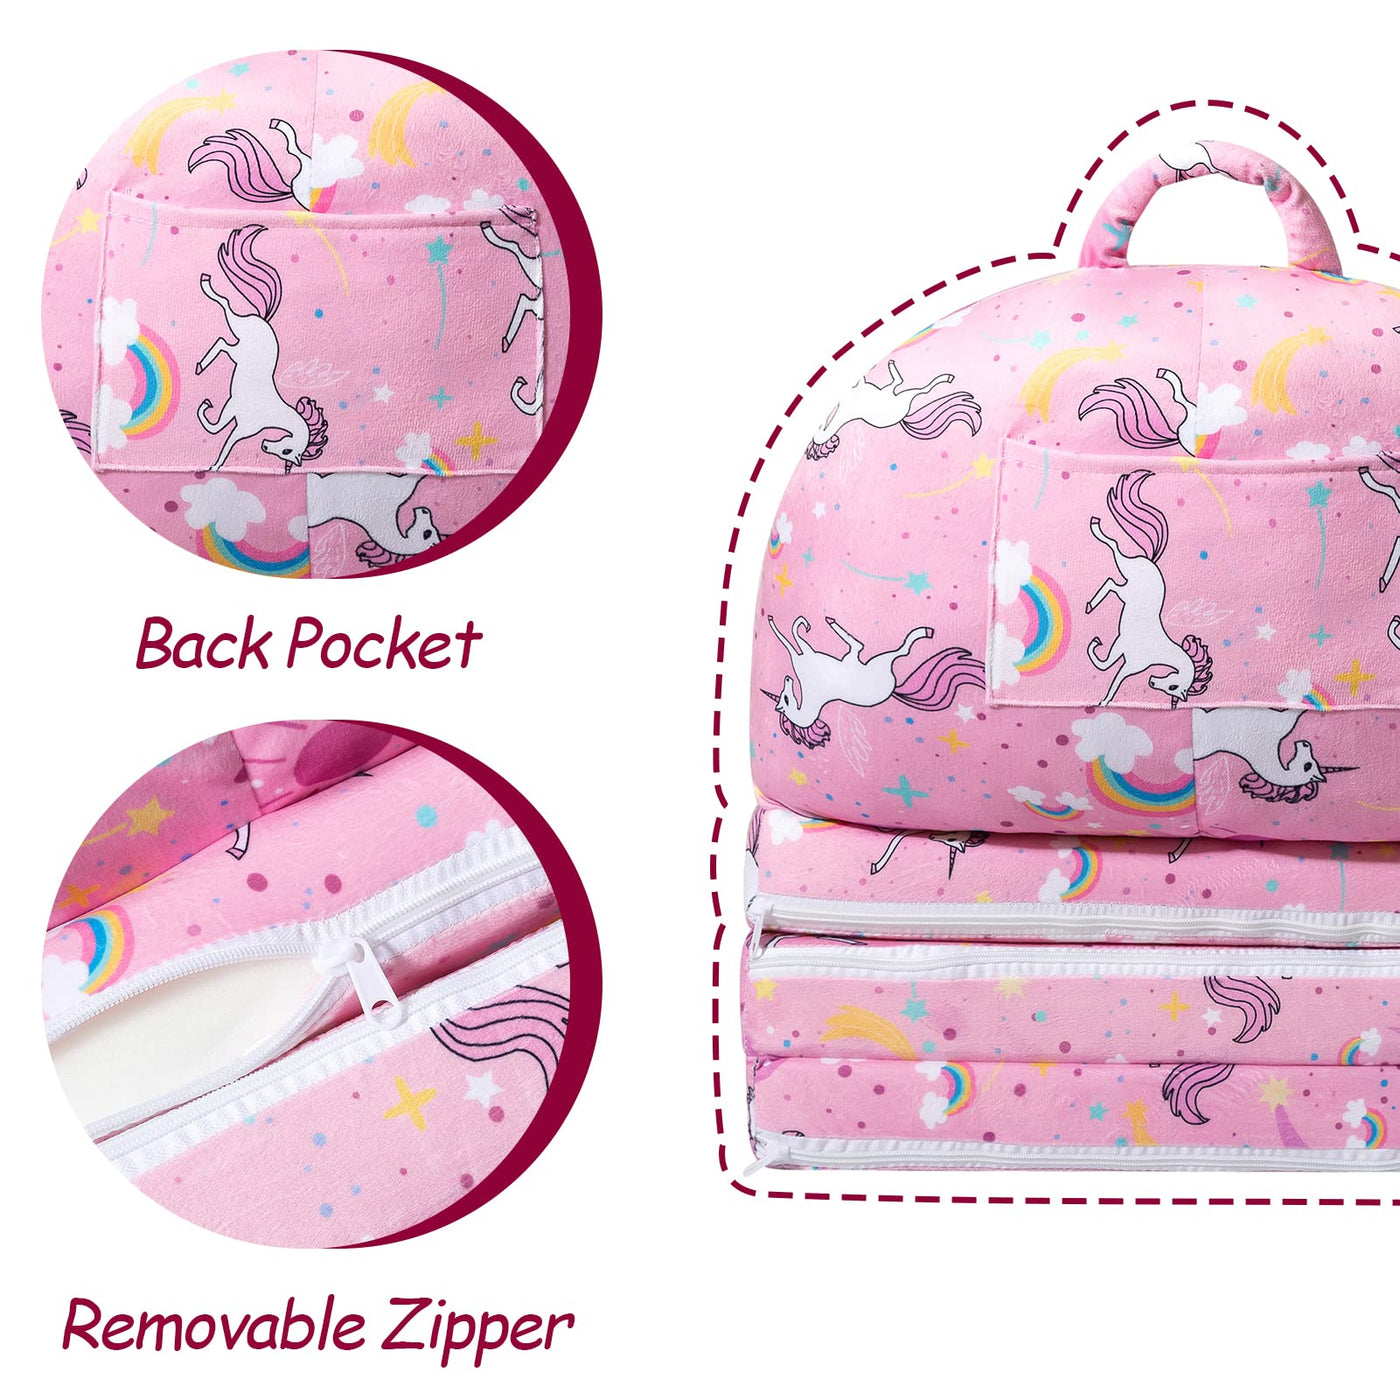 MAXYOYO Foldable Kids Sofa, Children Couch Backrest Armchair Bed with Pocket, Unicorn Pattern